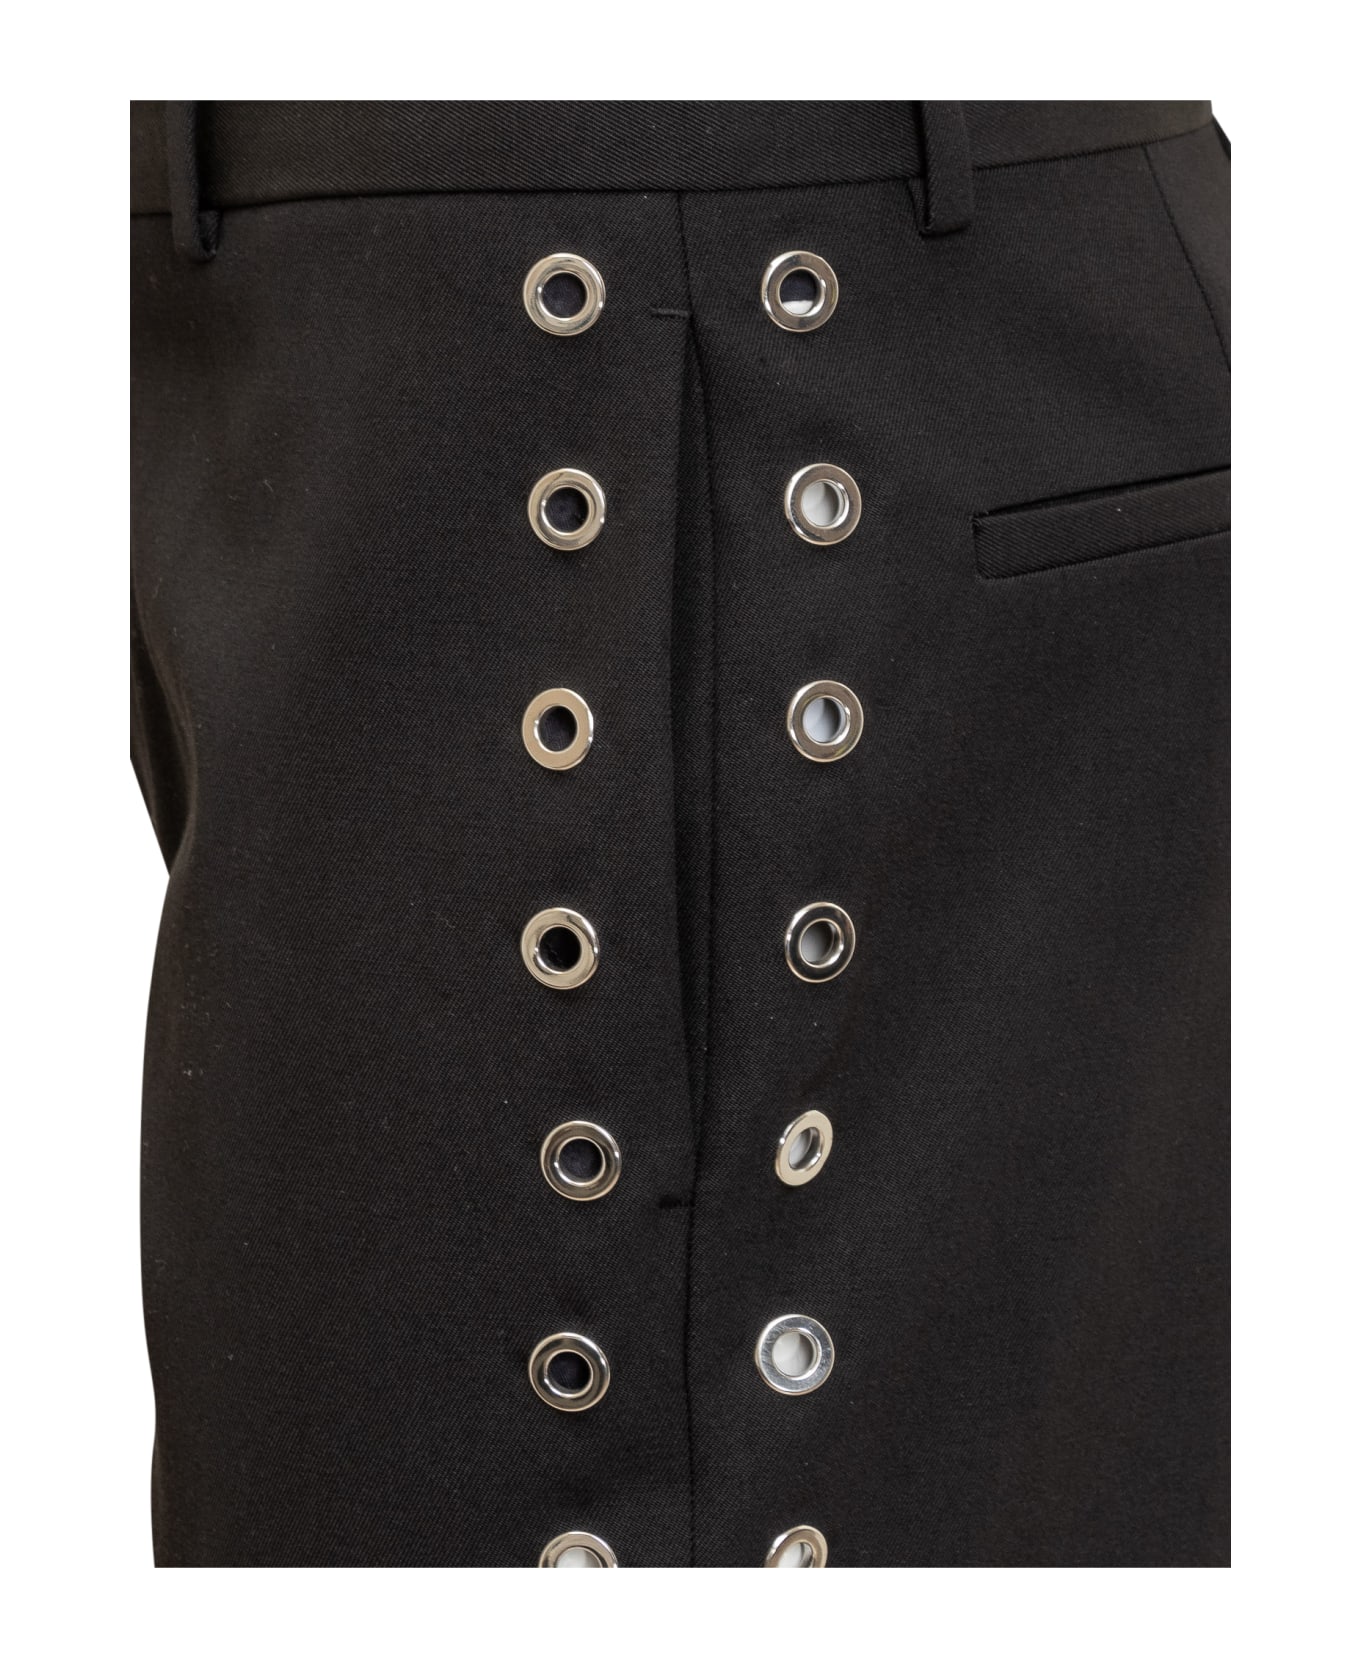 Off-White Wool Pants With Eyelets - Black